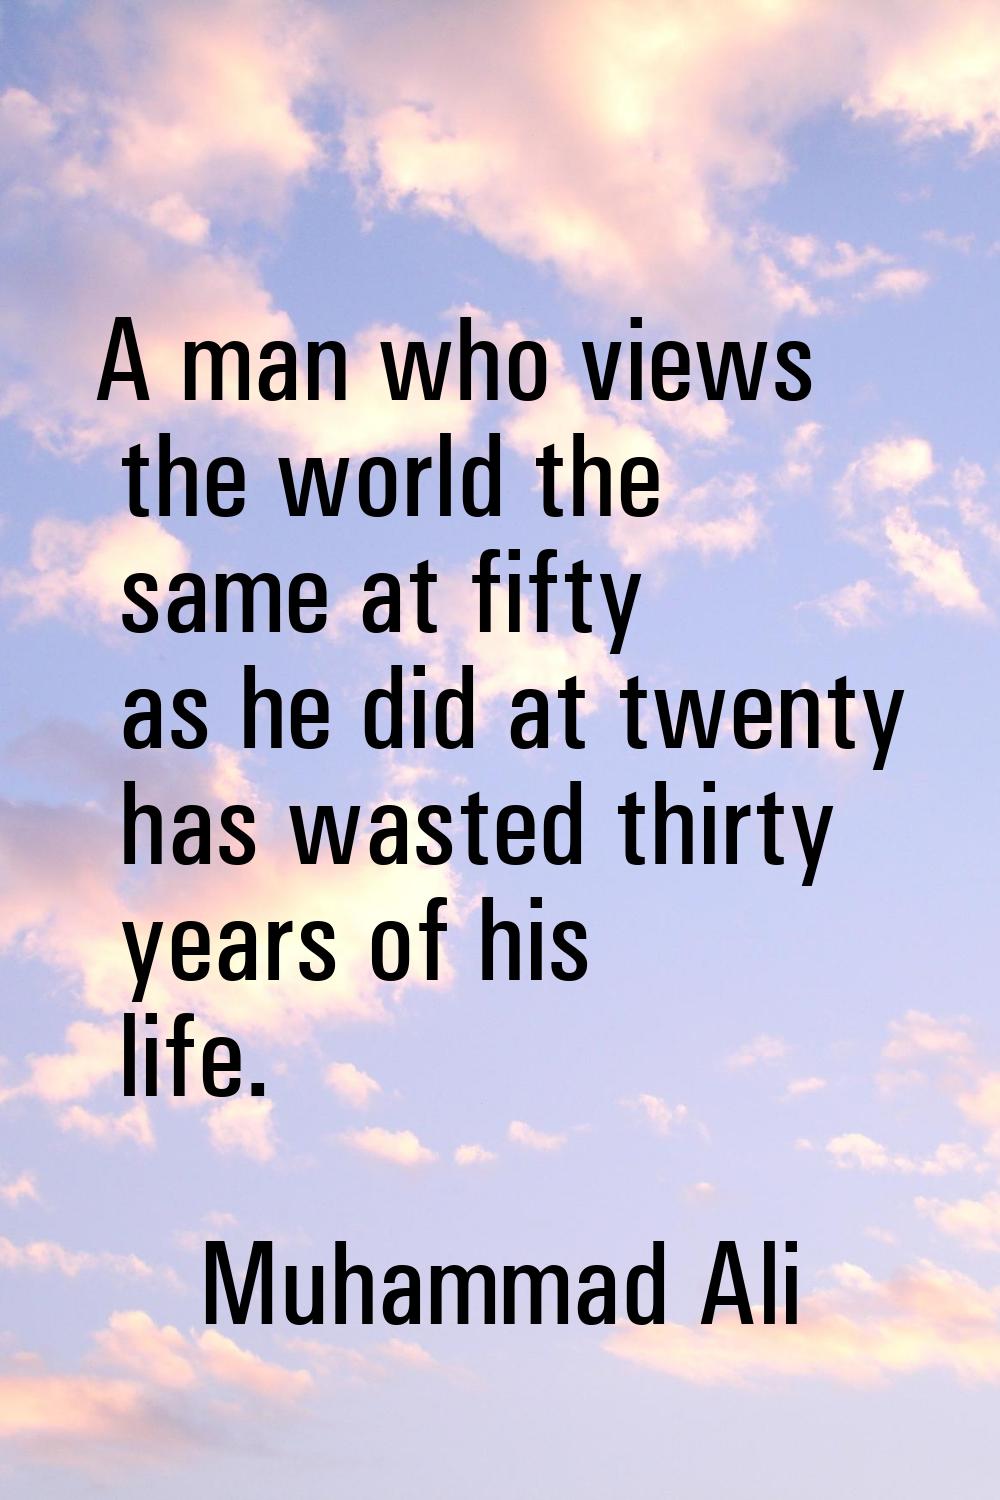 A man who views the world the same at fifty as he did at twenty has wasted thirty years of his life